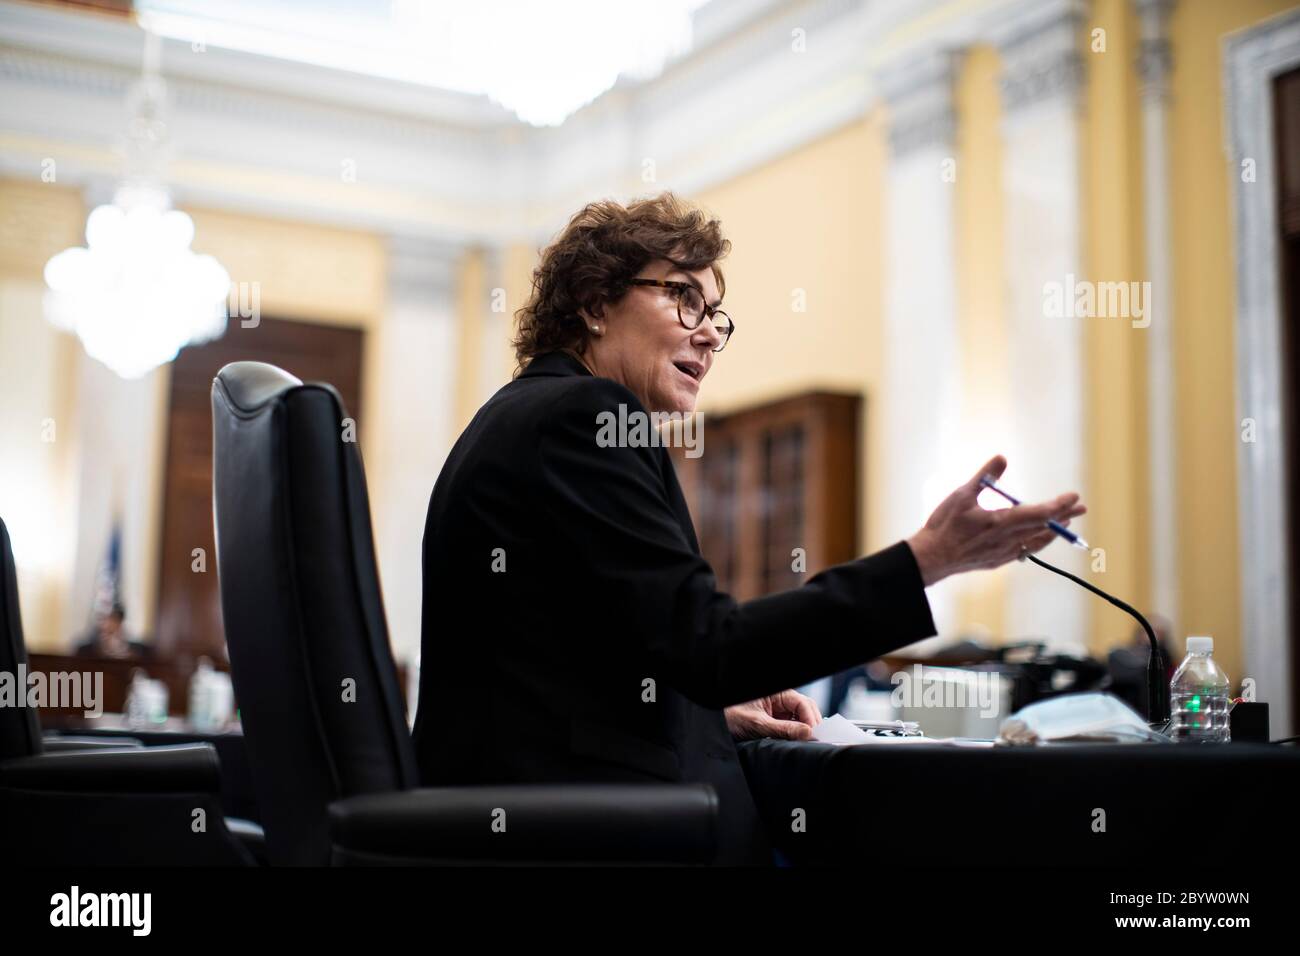 Washington, DC, USA. 10th June, 2020. United States Senator Jacky Rosen (Democrat of Nevada), speaks during a US Senate Small Business and Entrepreneurship Committee hearing in Washington, DC, U.S., on Wednesday, June 10, 2020. The hearing examines the government's virus relief package that offers emergency assistance to small businesses. Credit: Al Drago/Pool via CNP | usage worldwide Credit: dpa/Alamy Live News Stock Photo